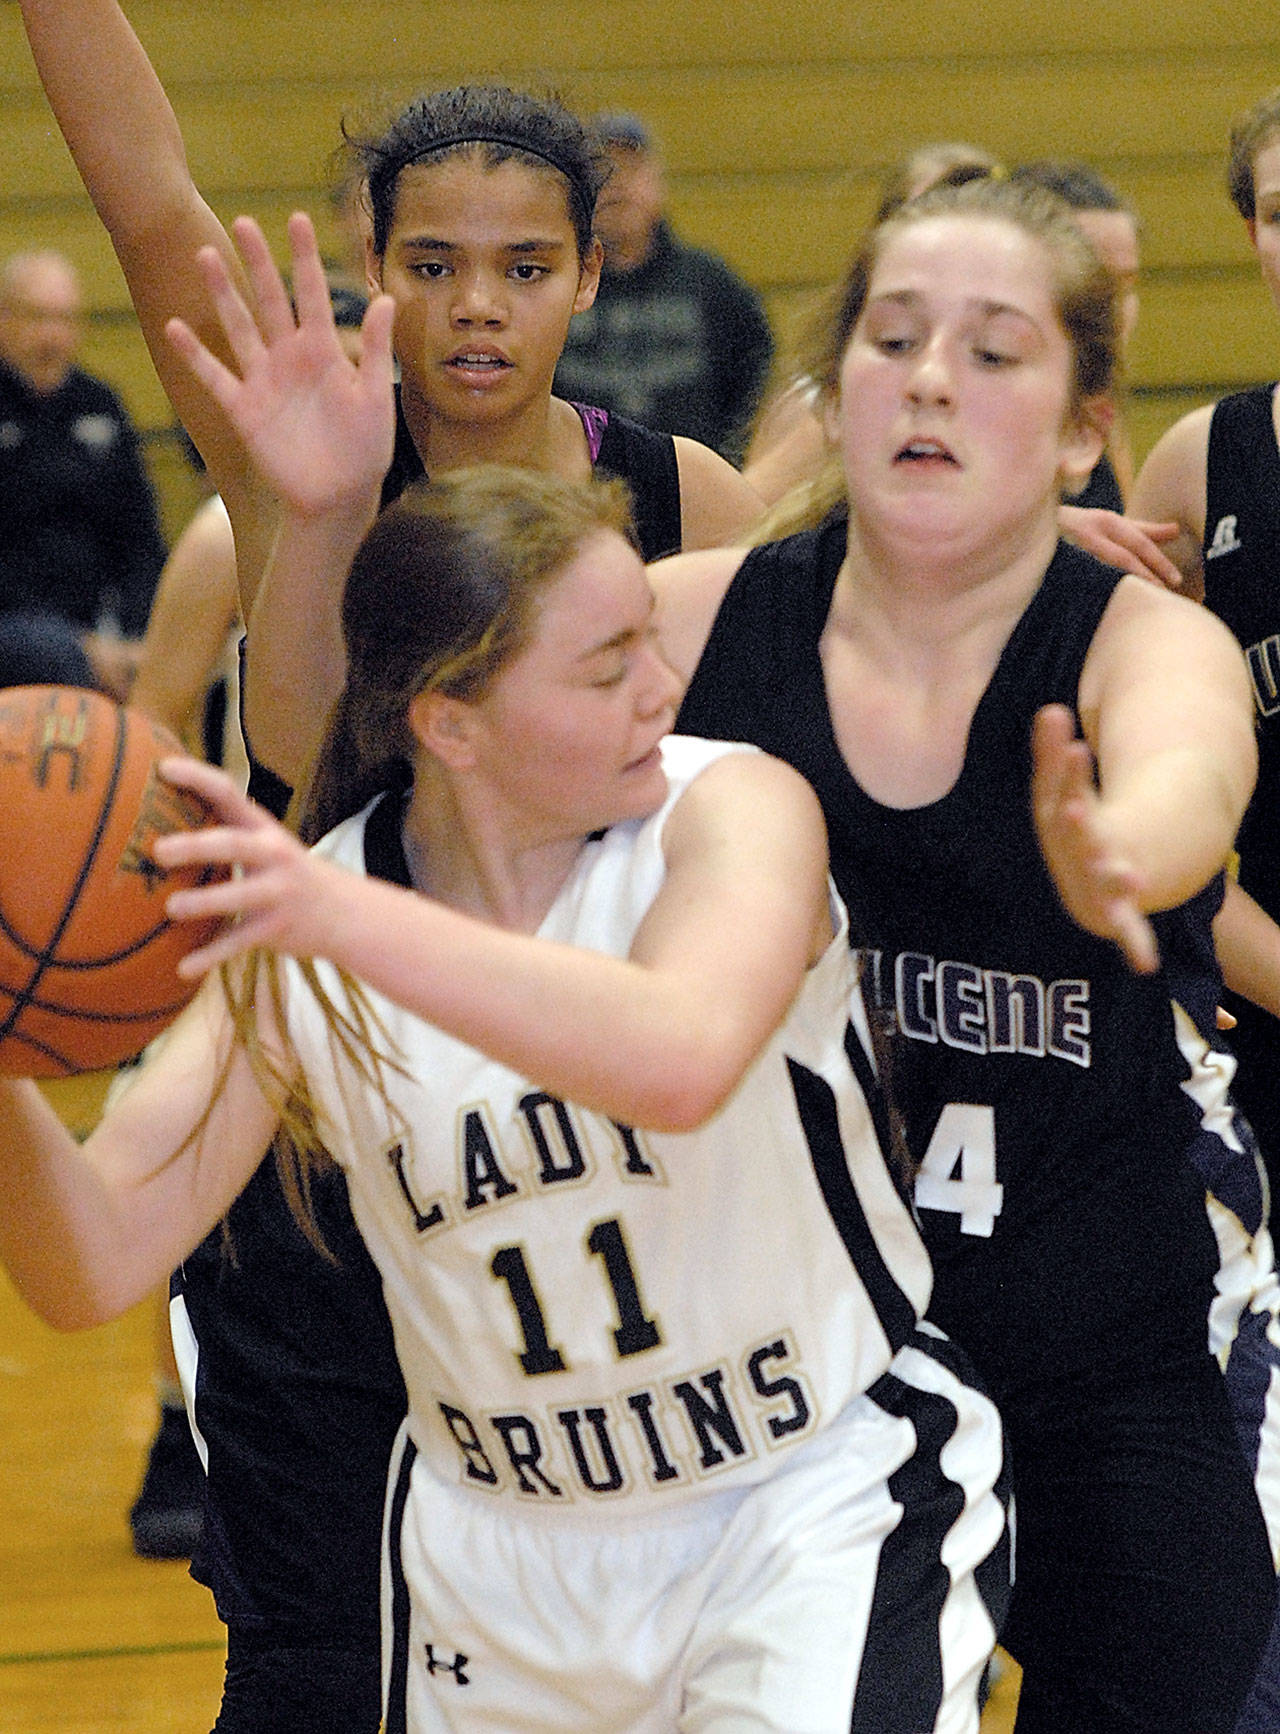 Clallam Bay’s Hannah Olson, center, fends off the defensive efforts of Quilcene’s Marissa Kieffer, right, and Gina Brown, back, in the first quarter of their Class 1B Tri-District Tournament loser-out girls basketball playoff game Saturday night at Port Angeles High School.                                (Keith Thorpe/Peninsula Daily News)